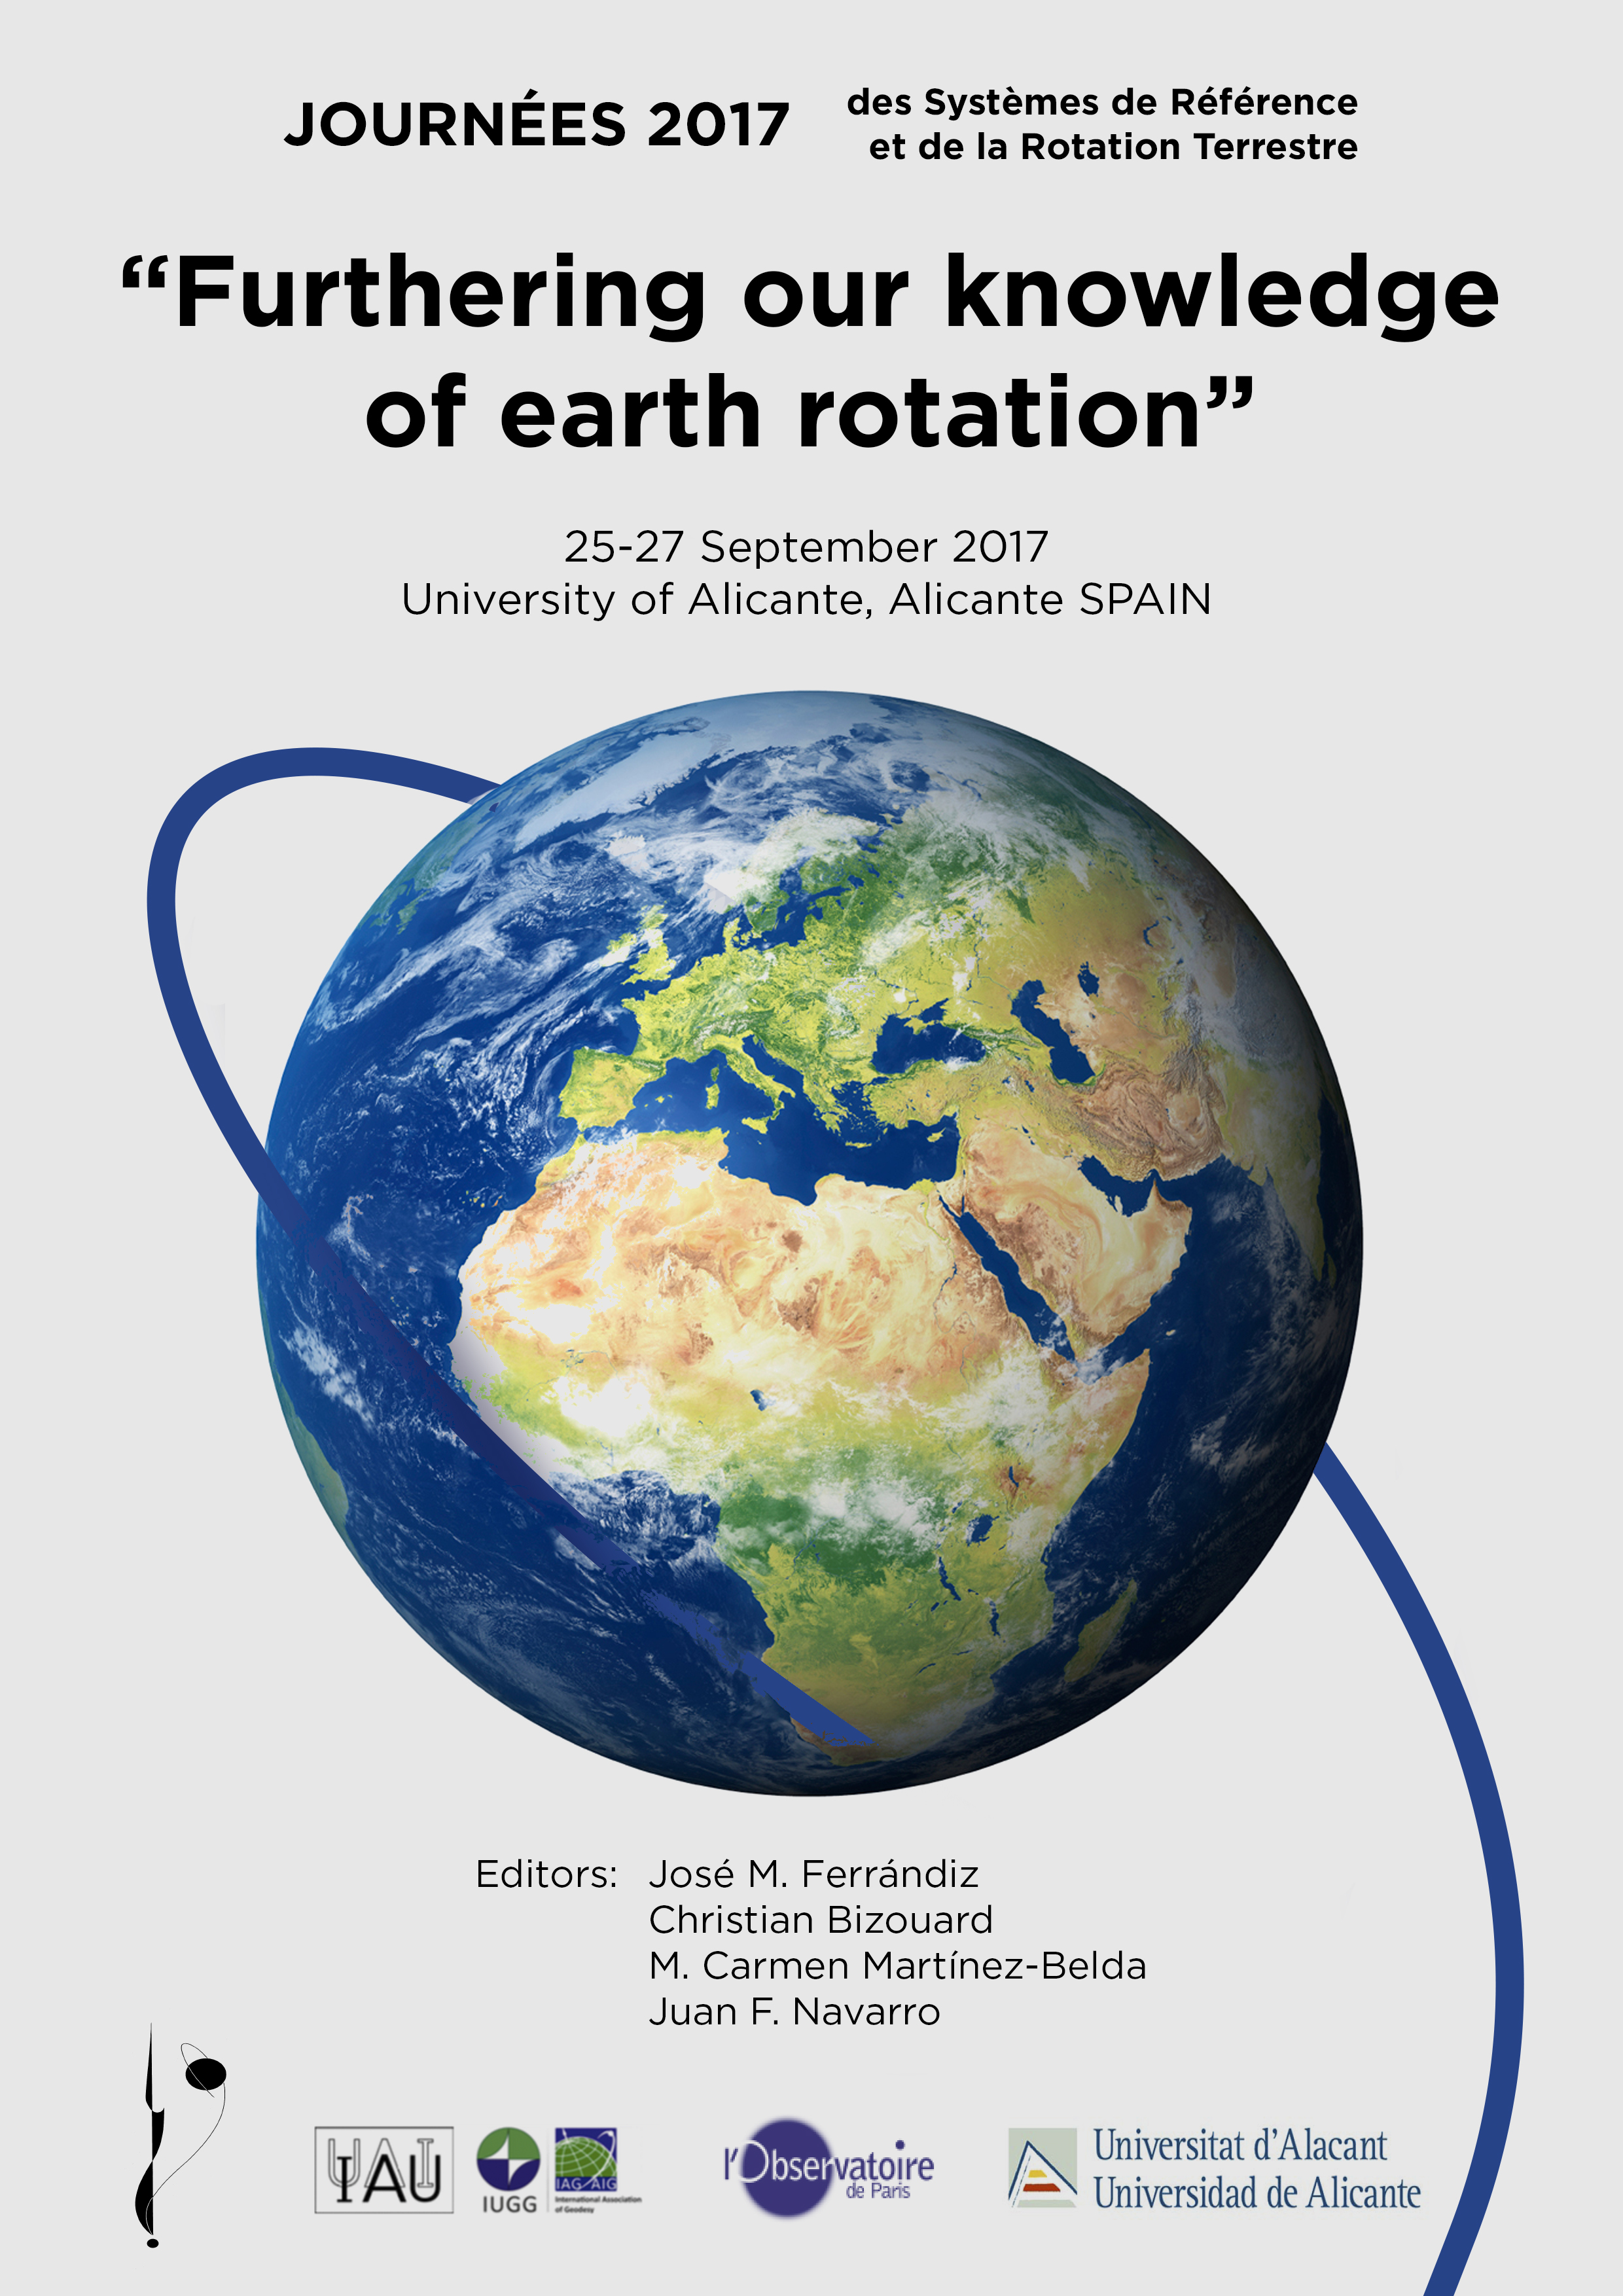 “Furthering our knowledge of Earth Rotation”